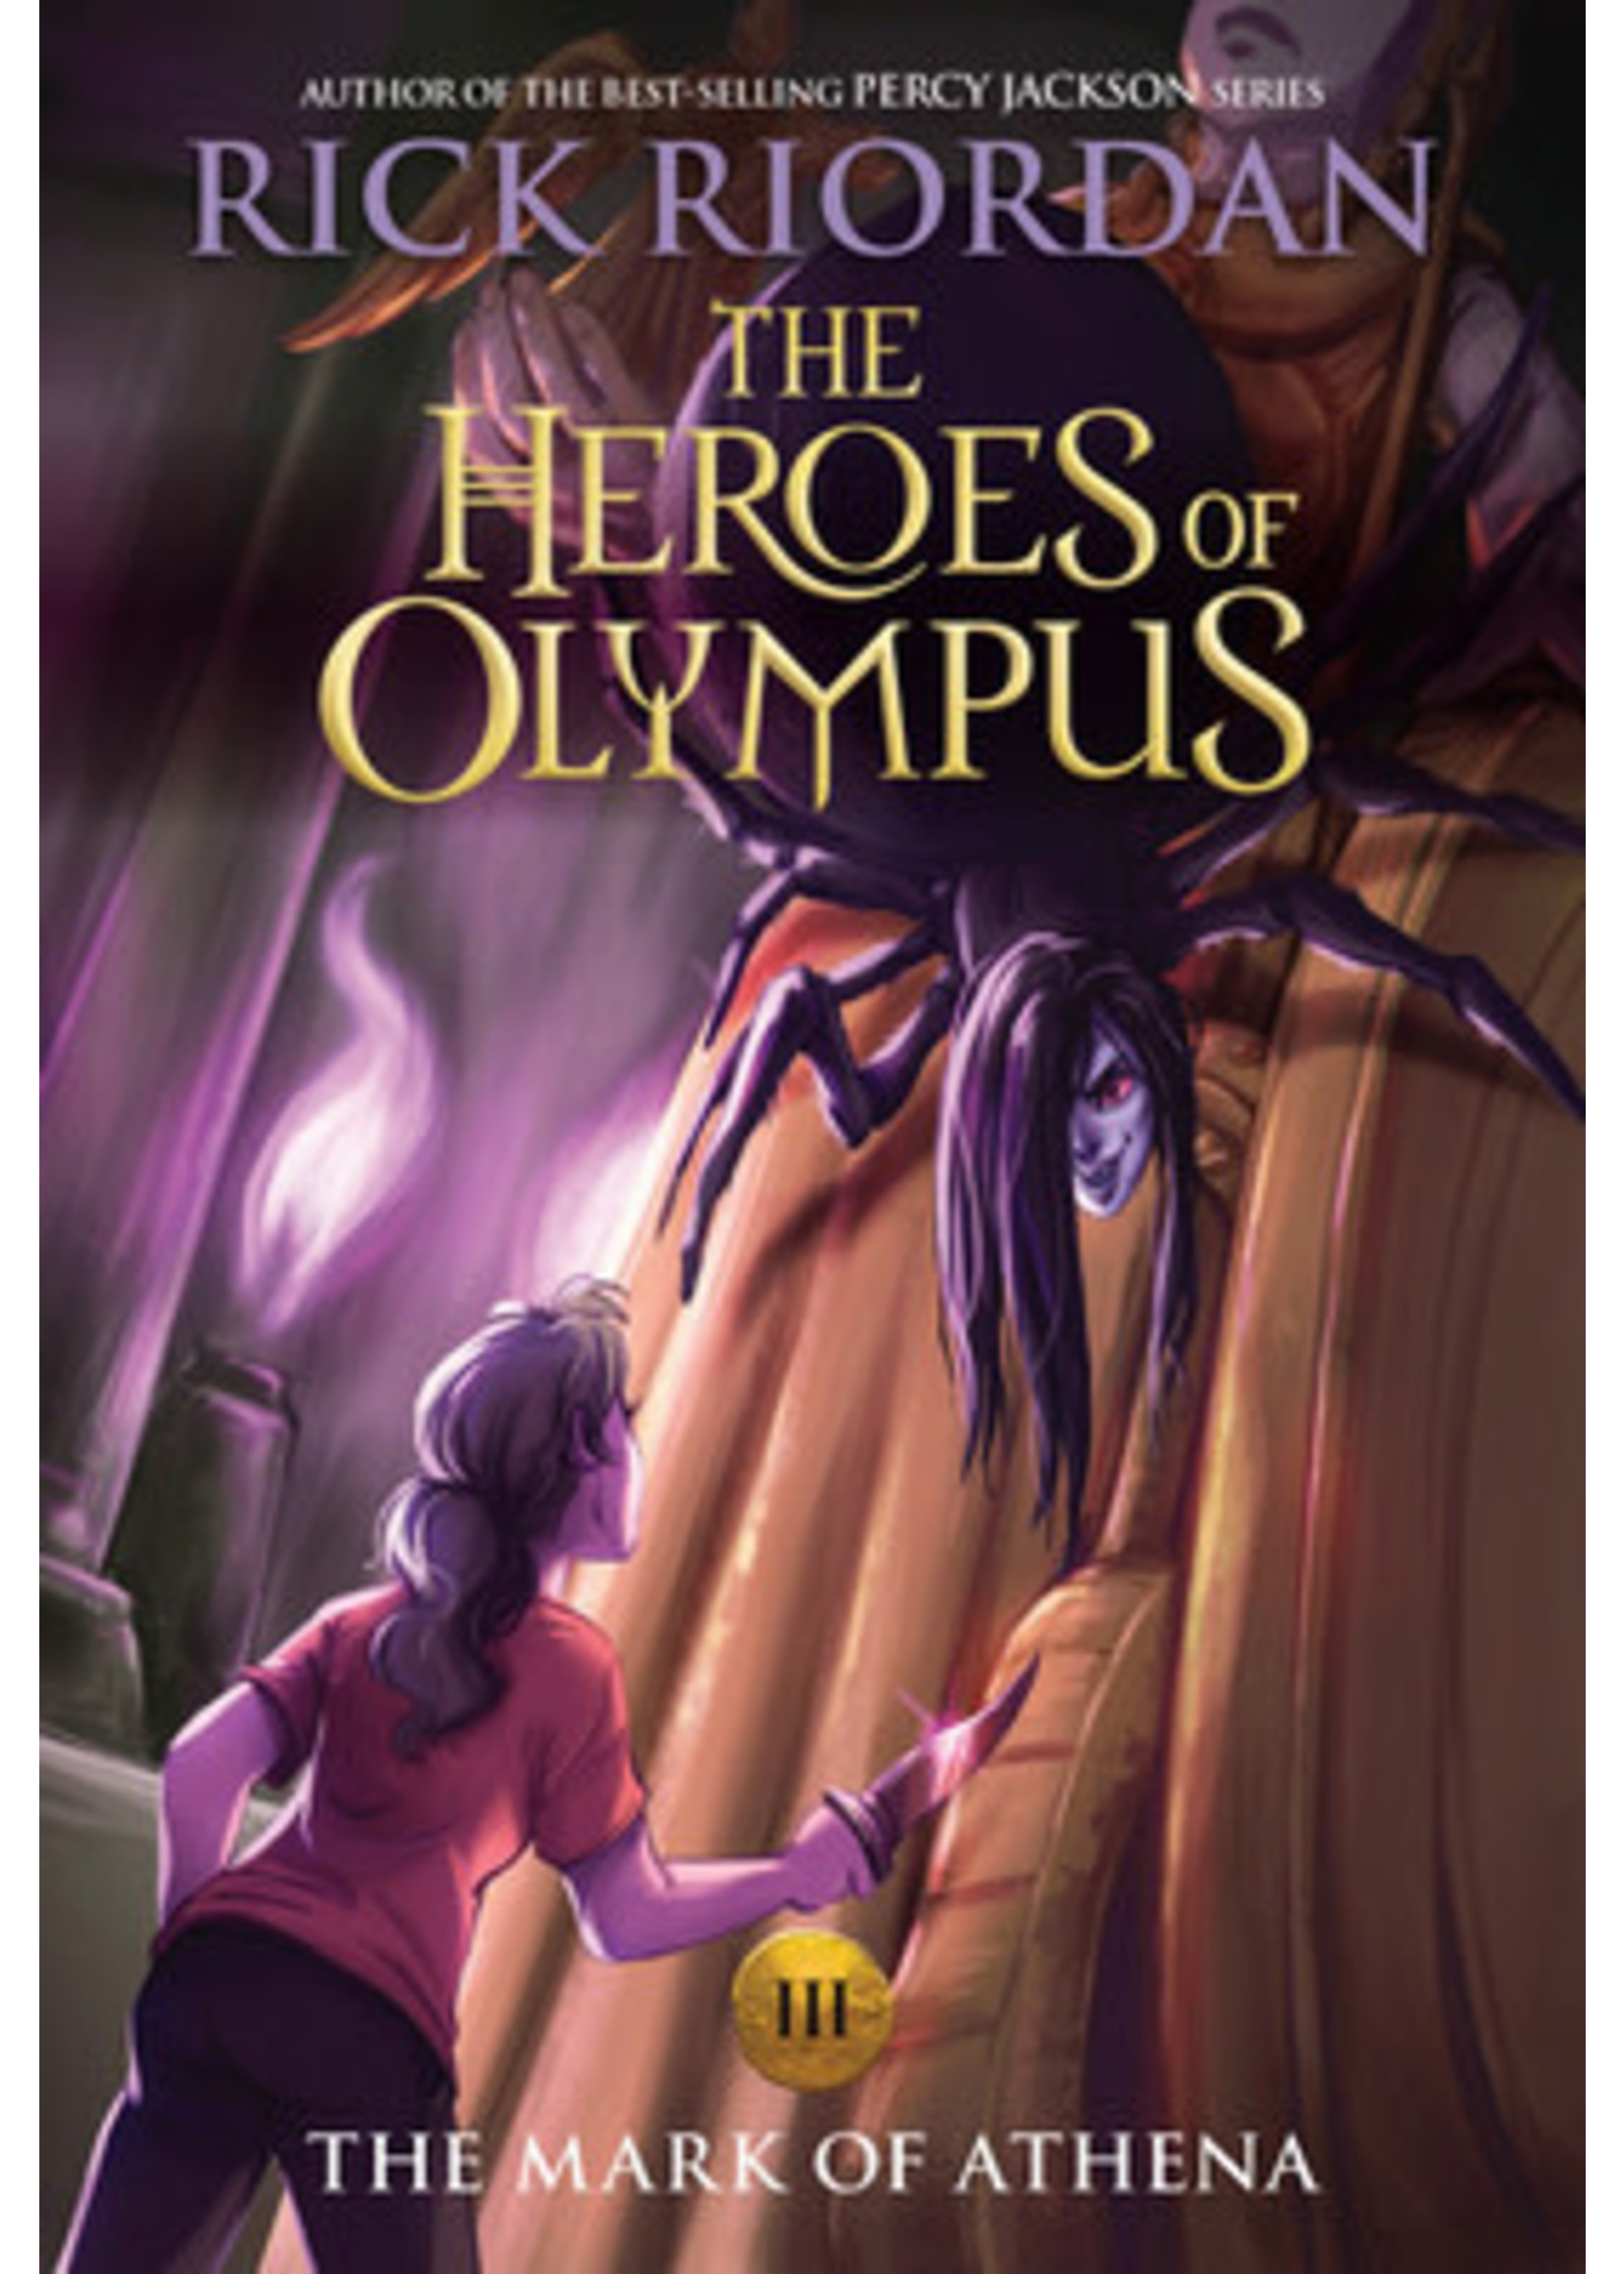 The Mark of Athena (The Heroes of Olympus #3) by Rick Riordan